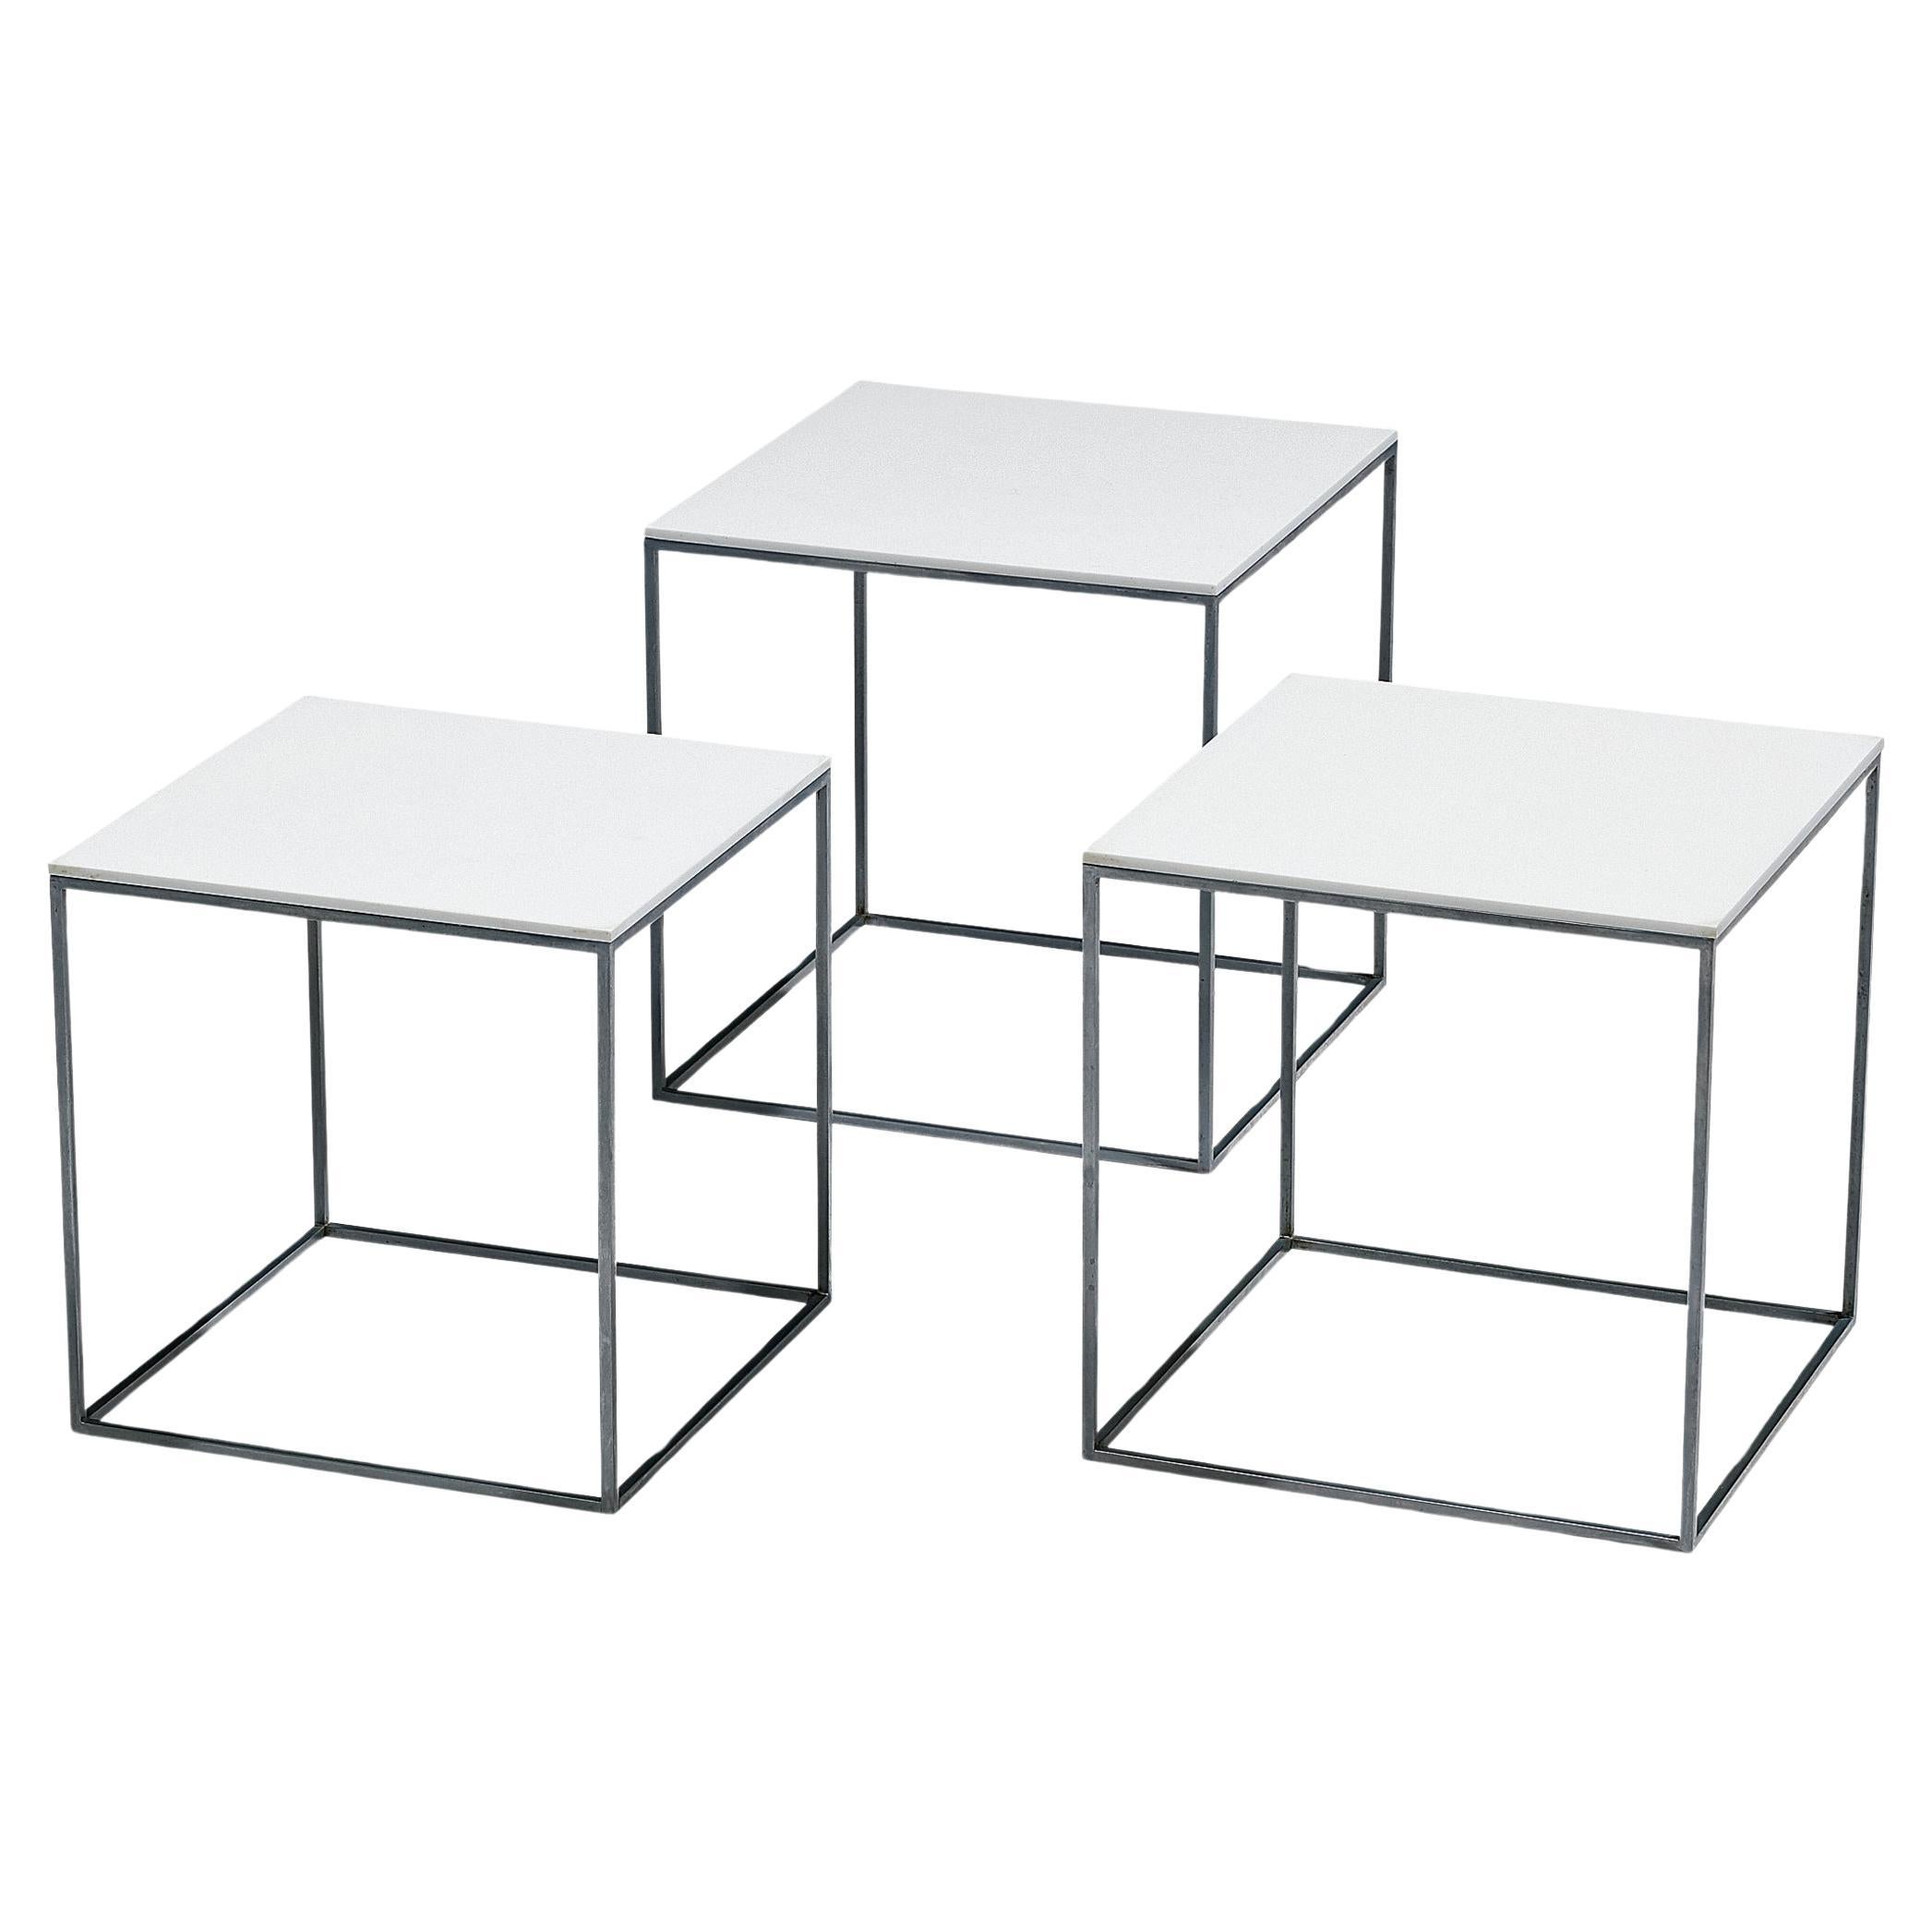 Poul Kjaerholm Set of Nesting Tables in White Perspex and Steel  For Sale